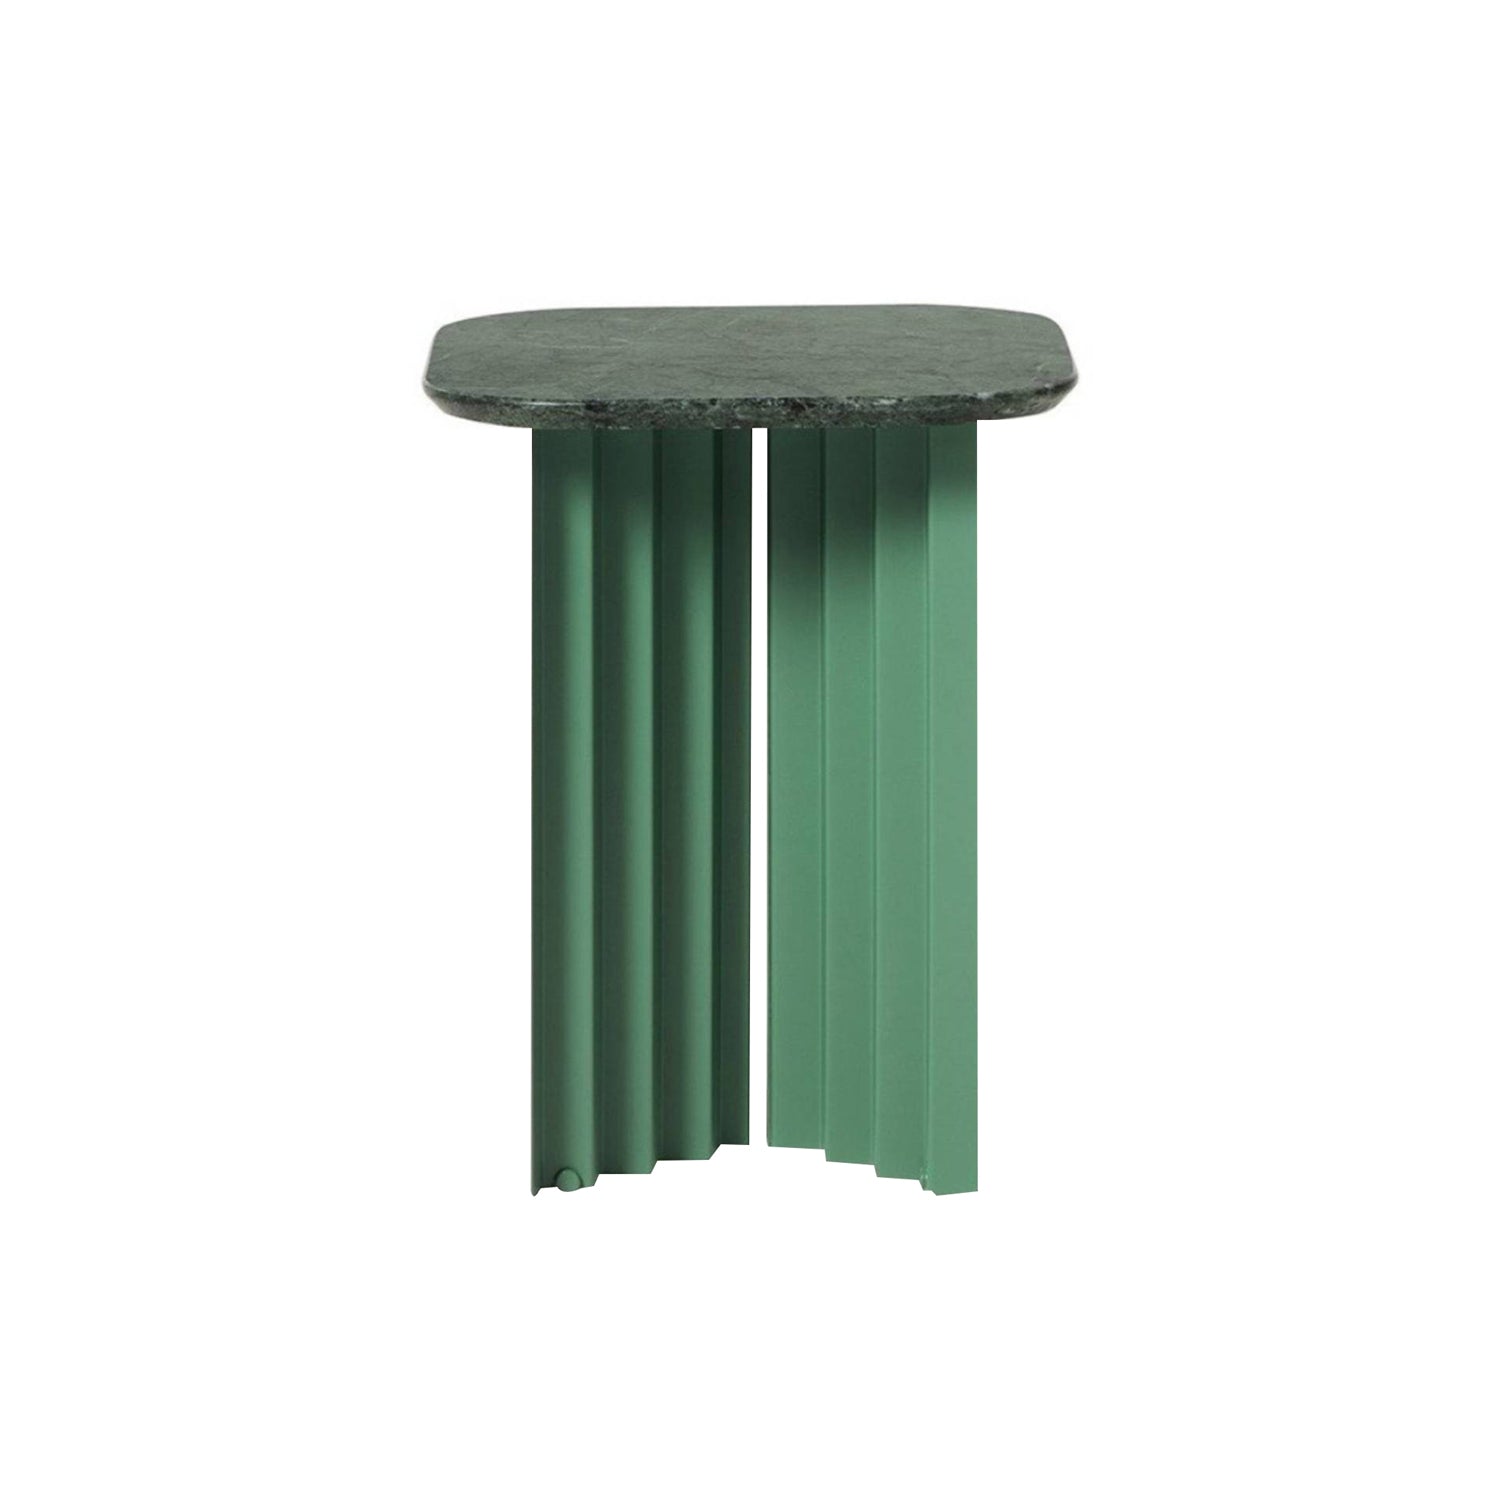 Plec Rectangular Occasional Table: Marble Top + Small - 14.8